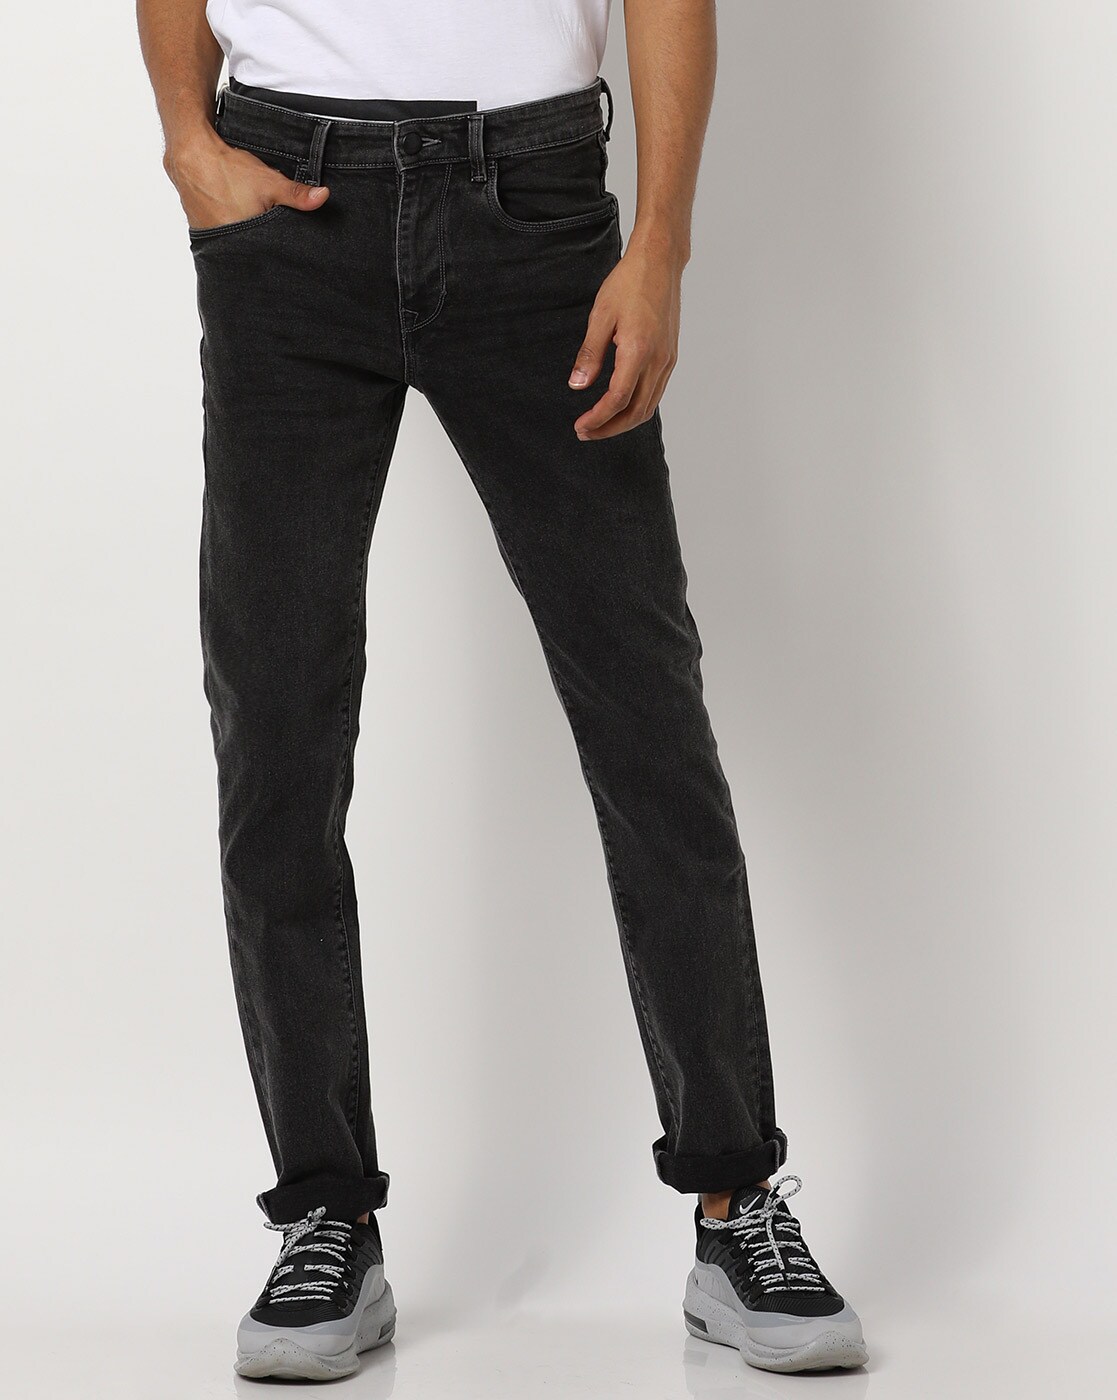 polo jeans online